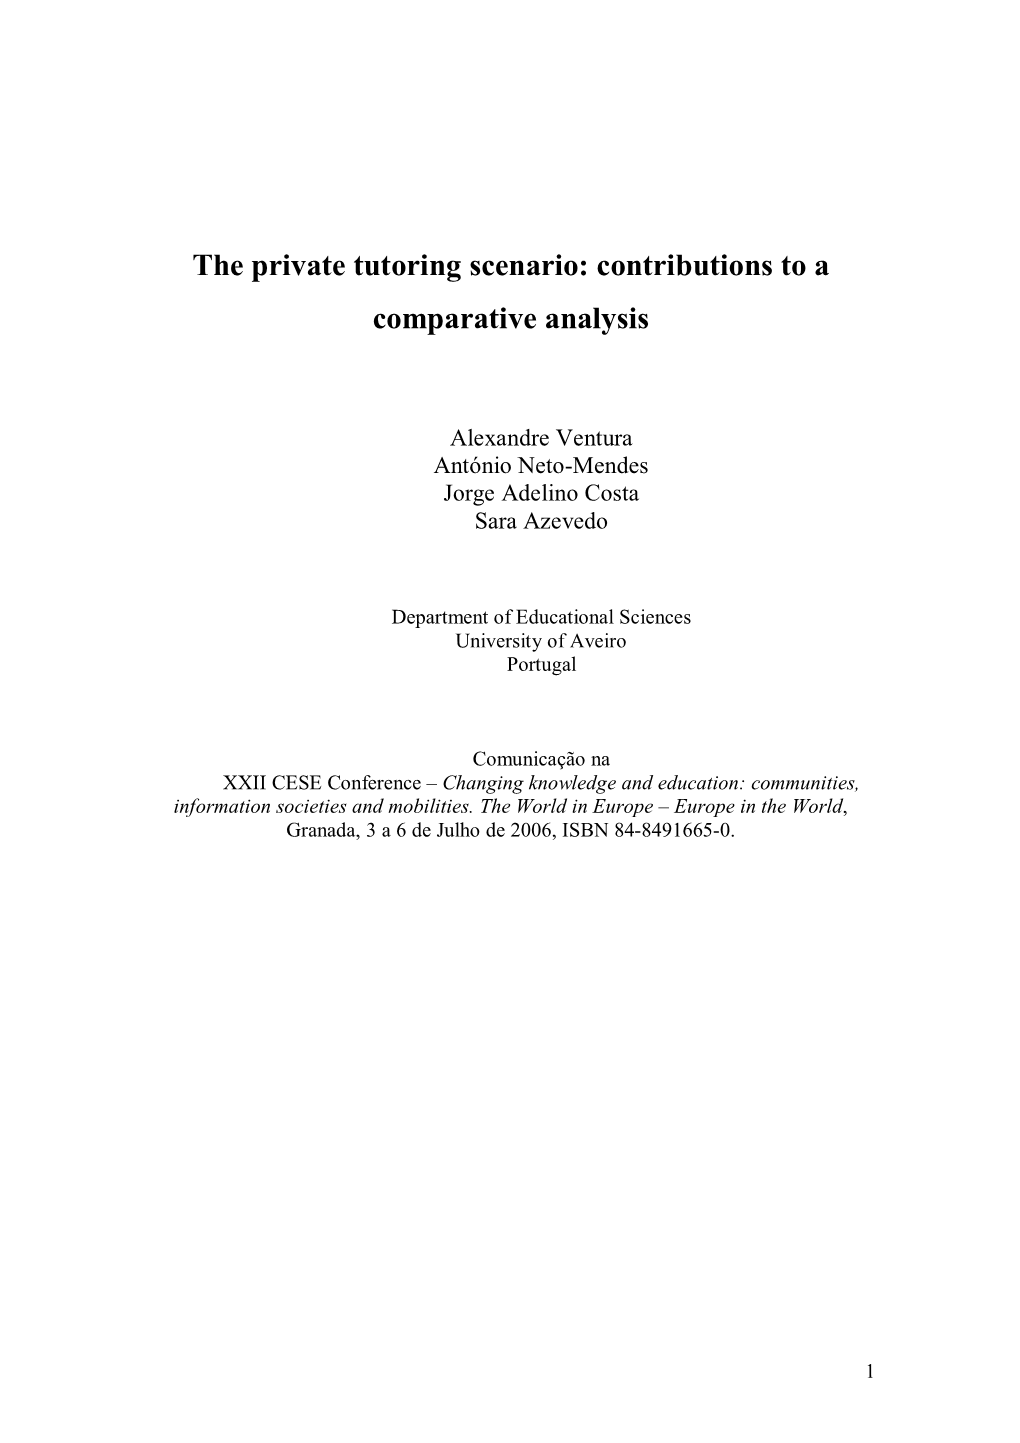 The Private Tutoring Scenario: Contributions to a Comparative Analysis